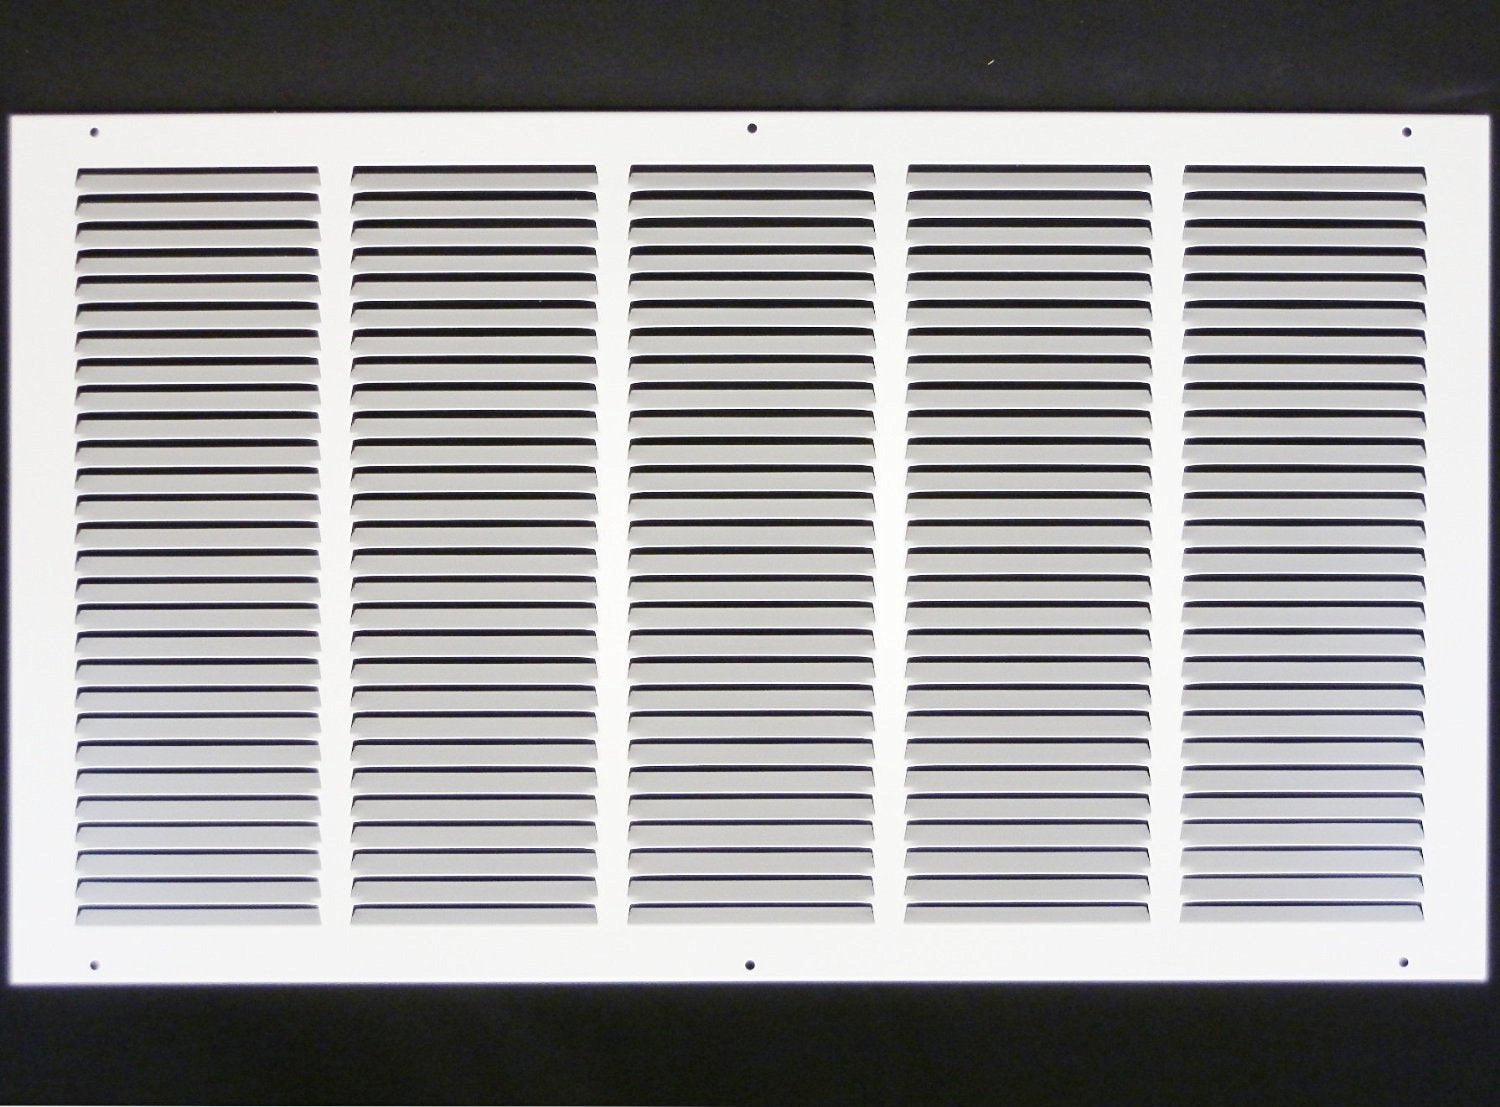 25" X 16" Air Vent Return Grilles - Sidewall and Ceiling - Steel